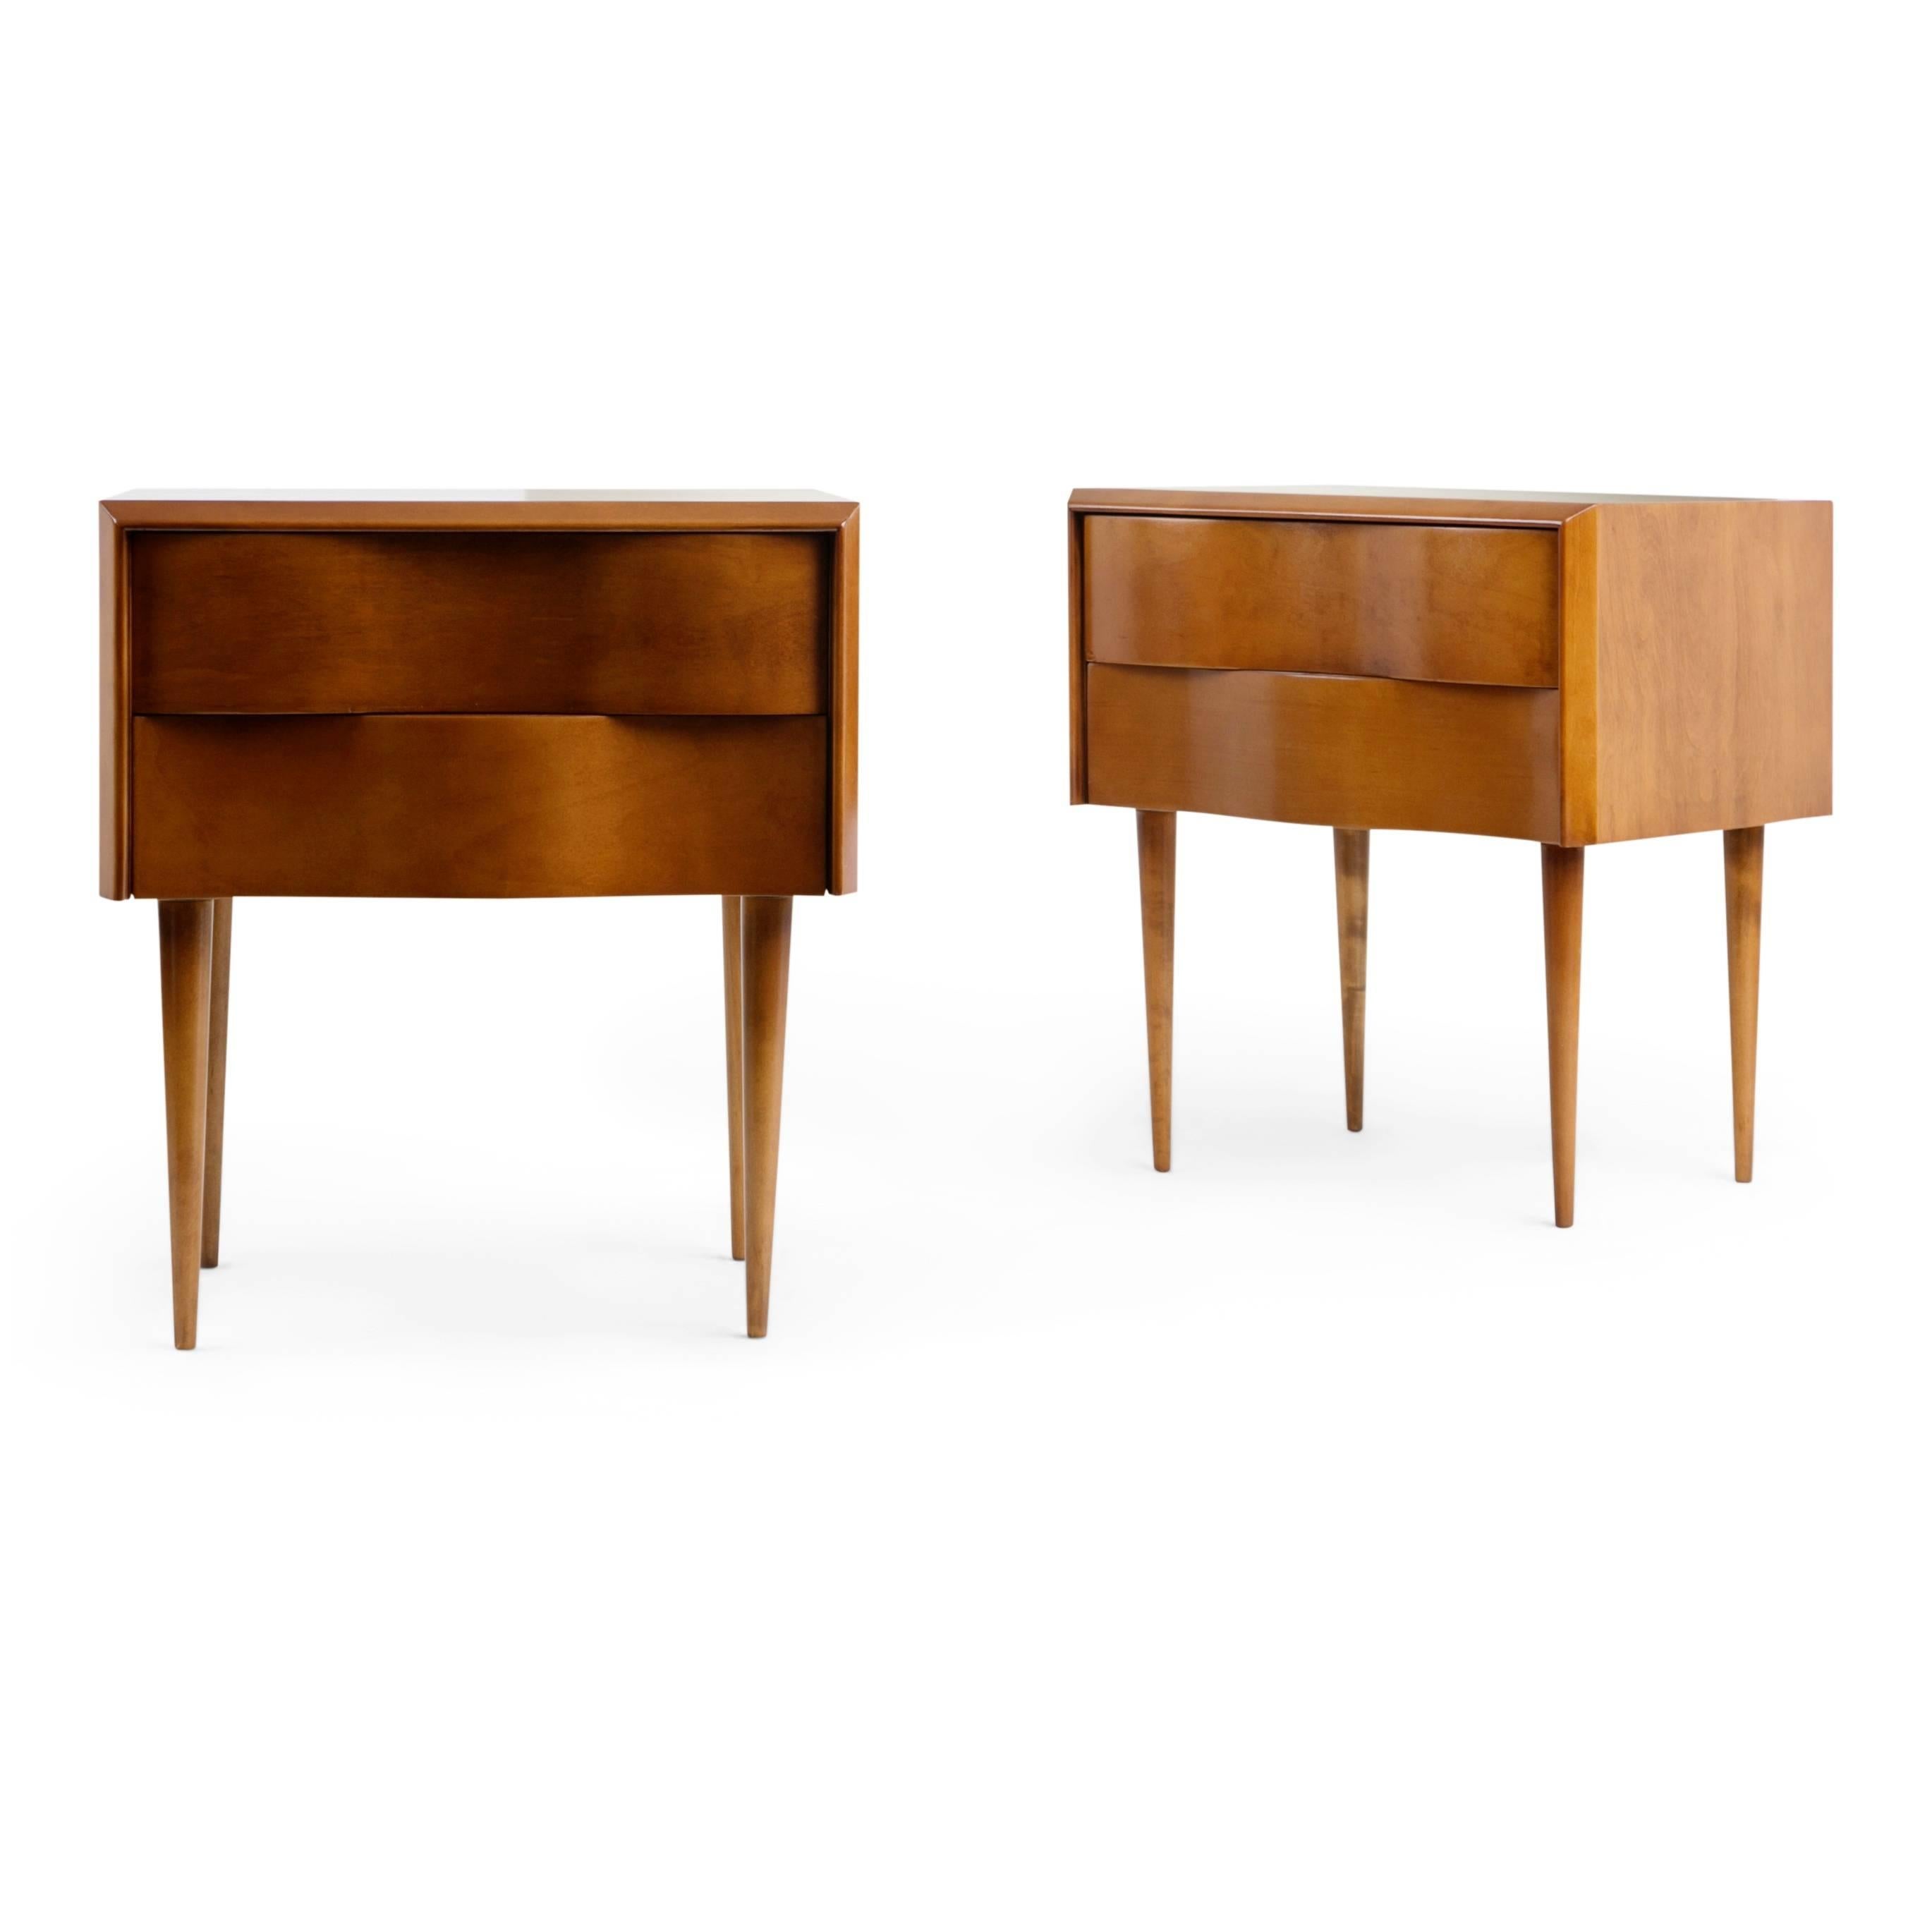 As part of his works American designer, Edmond J. Spence, often misspelled Edmund, created a series of Swedish-inspired furniture that was manufactured in Sweden and imported by Walpole Furniture of Massachusetts. This pair of nightstands are an